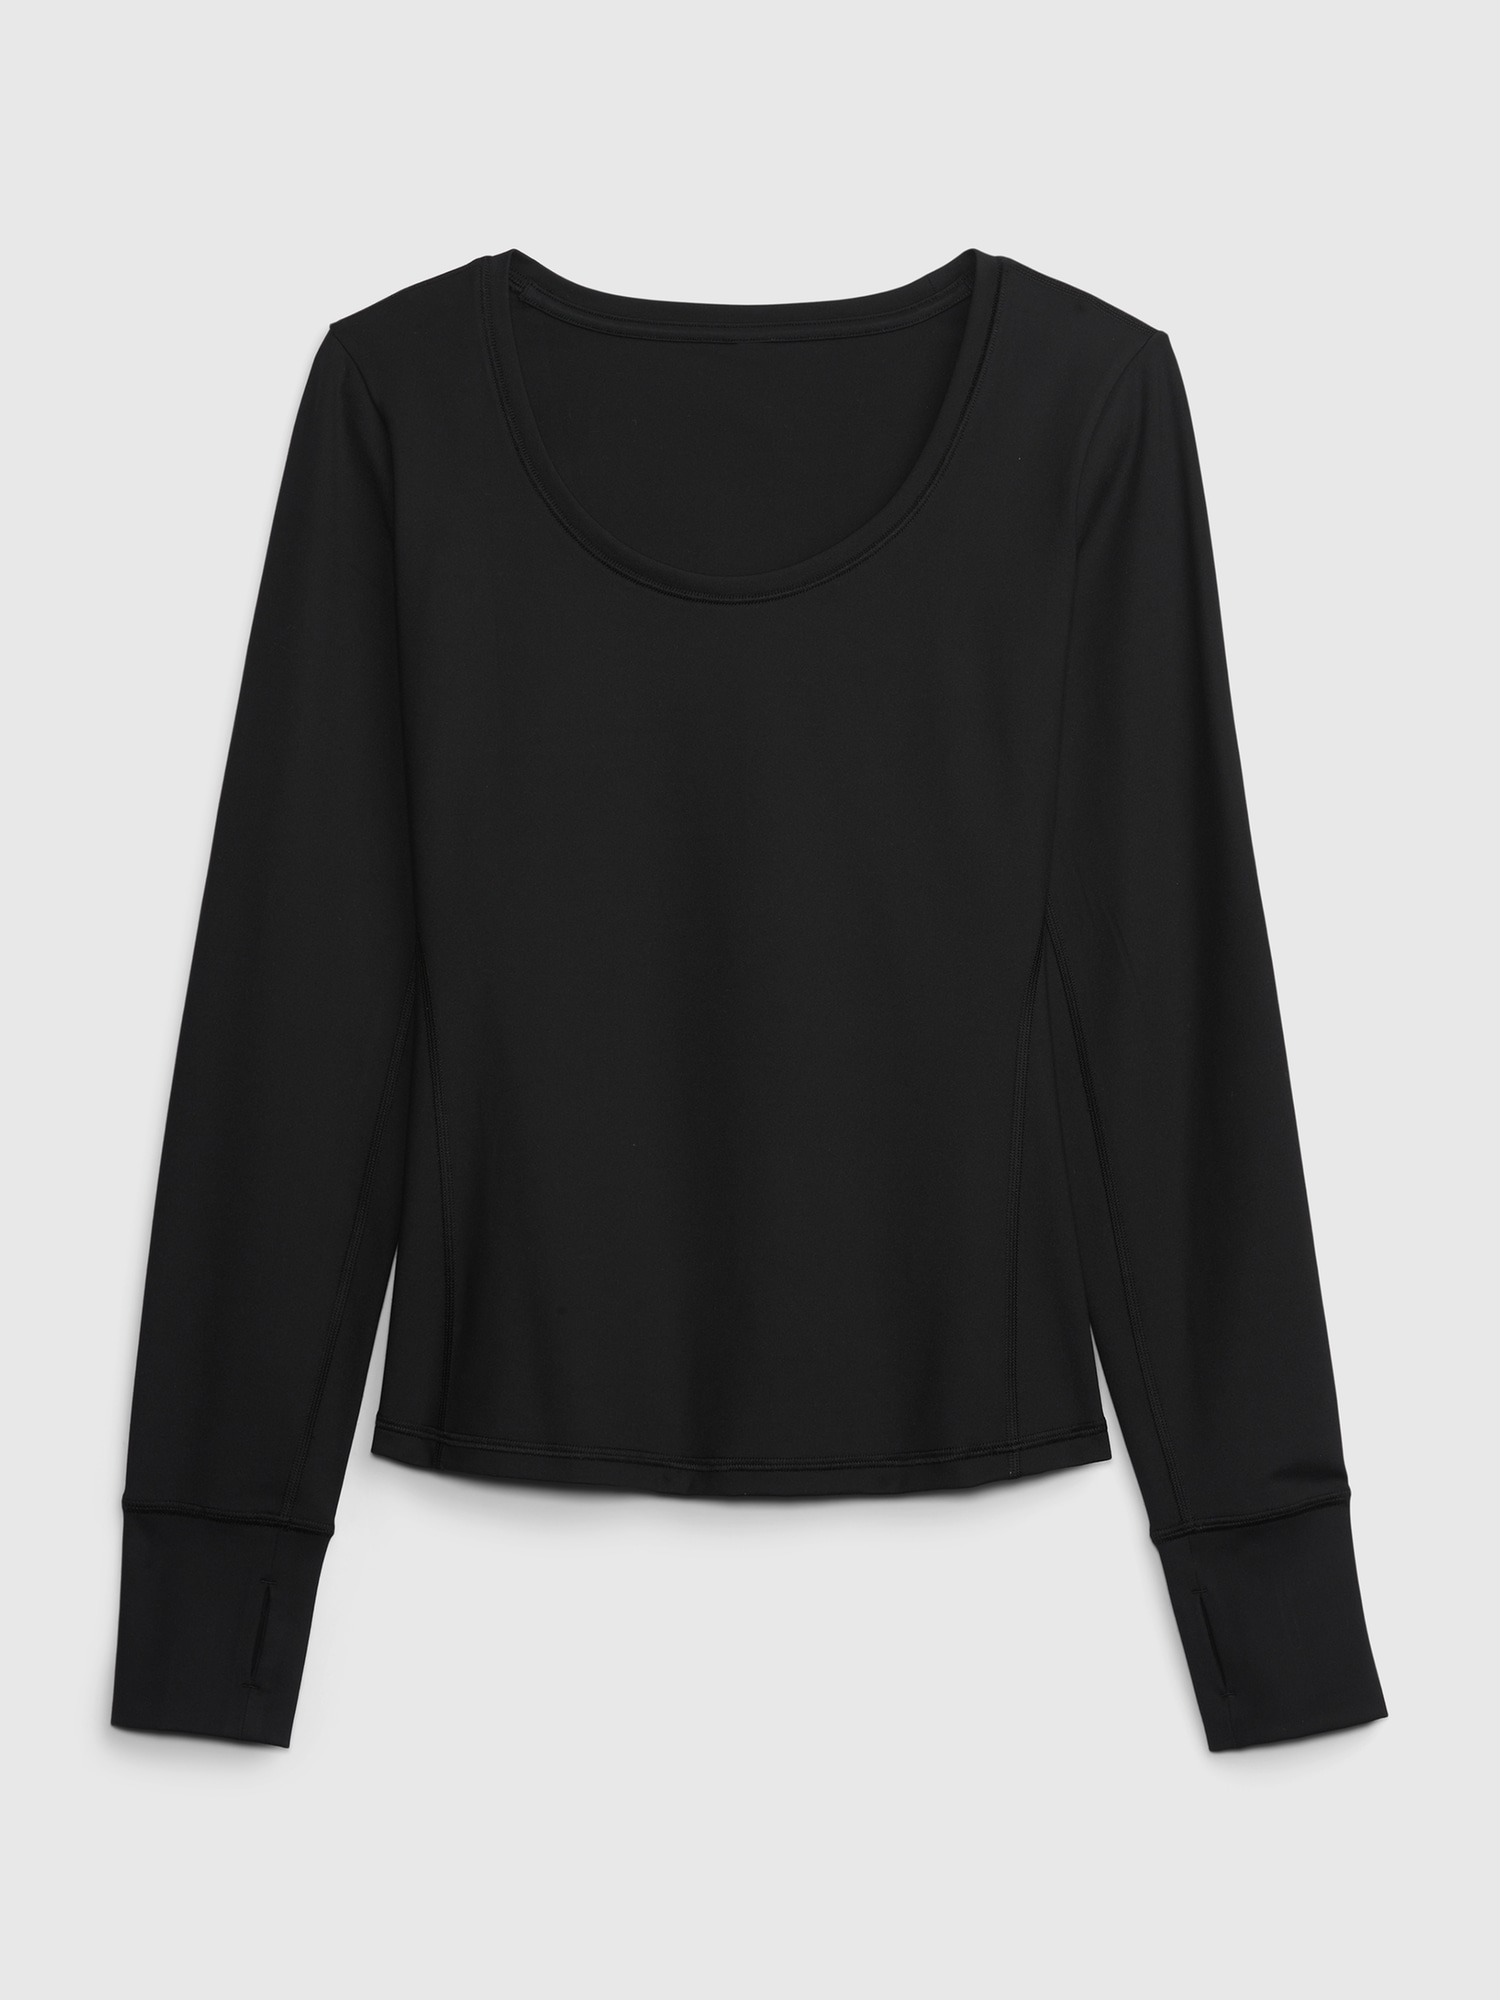 Gap in 2023  Knitted tshirt, T shirts for women, Gap fit